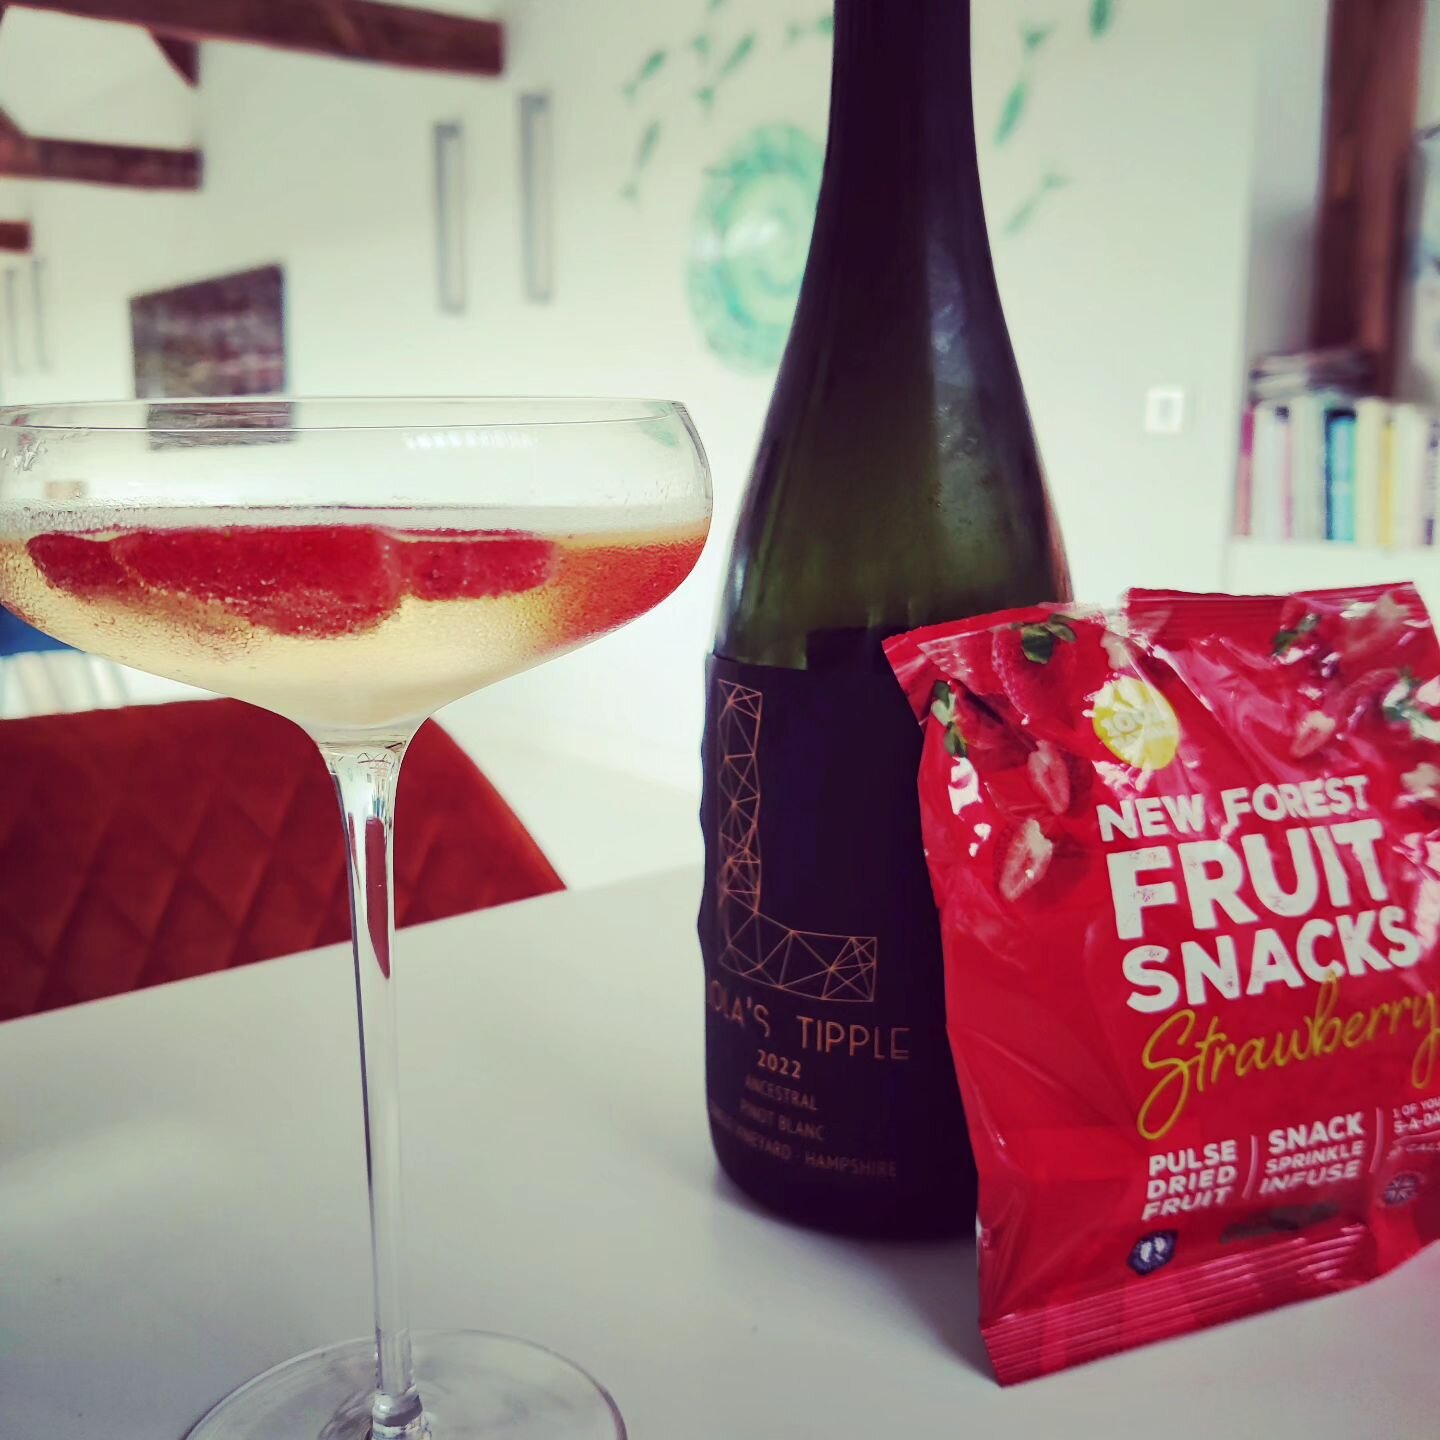 Lola's tipple...with @newforestfruitsnacks strawberries, nothing but the fruit. Absolutely delicious. 💃💃💃